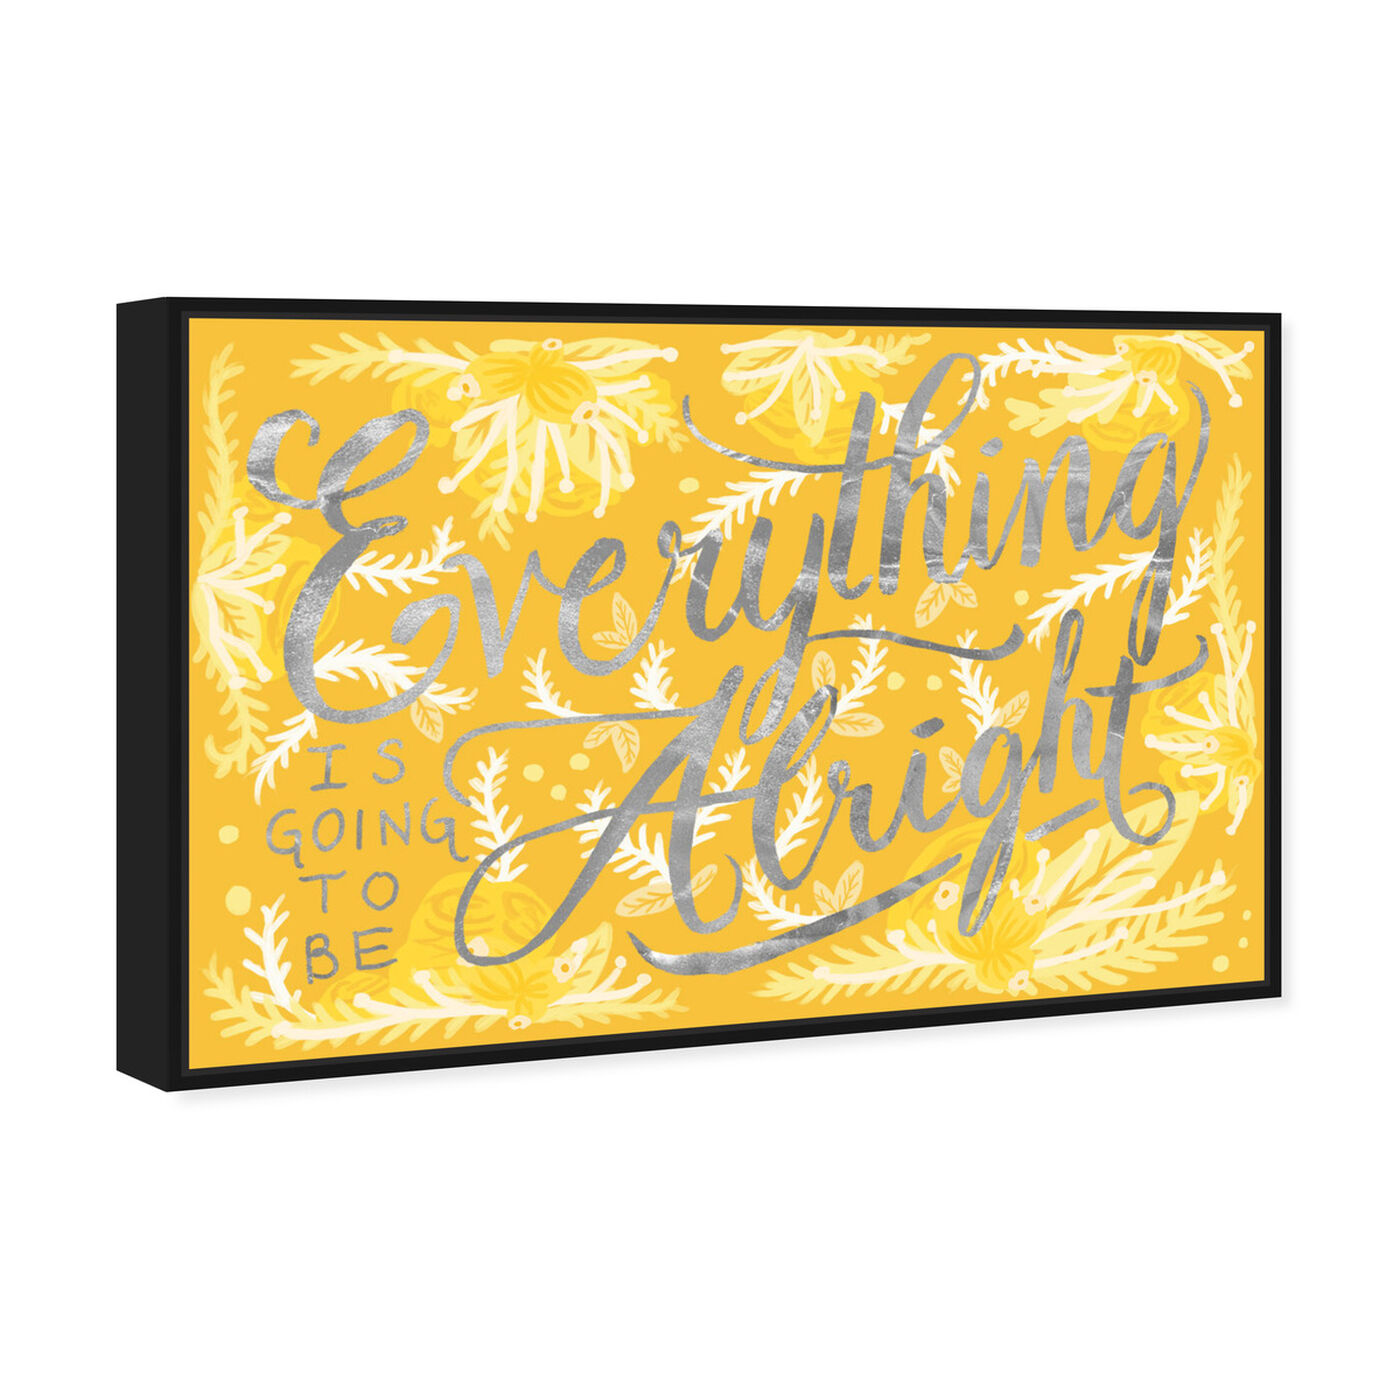 Angled view of Alright Canary featuring typography and quotes and inspirational quotes and sayings art.